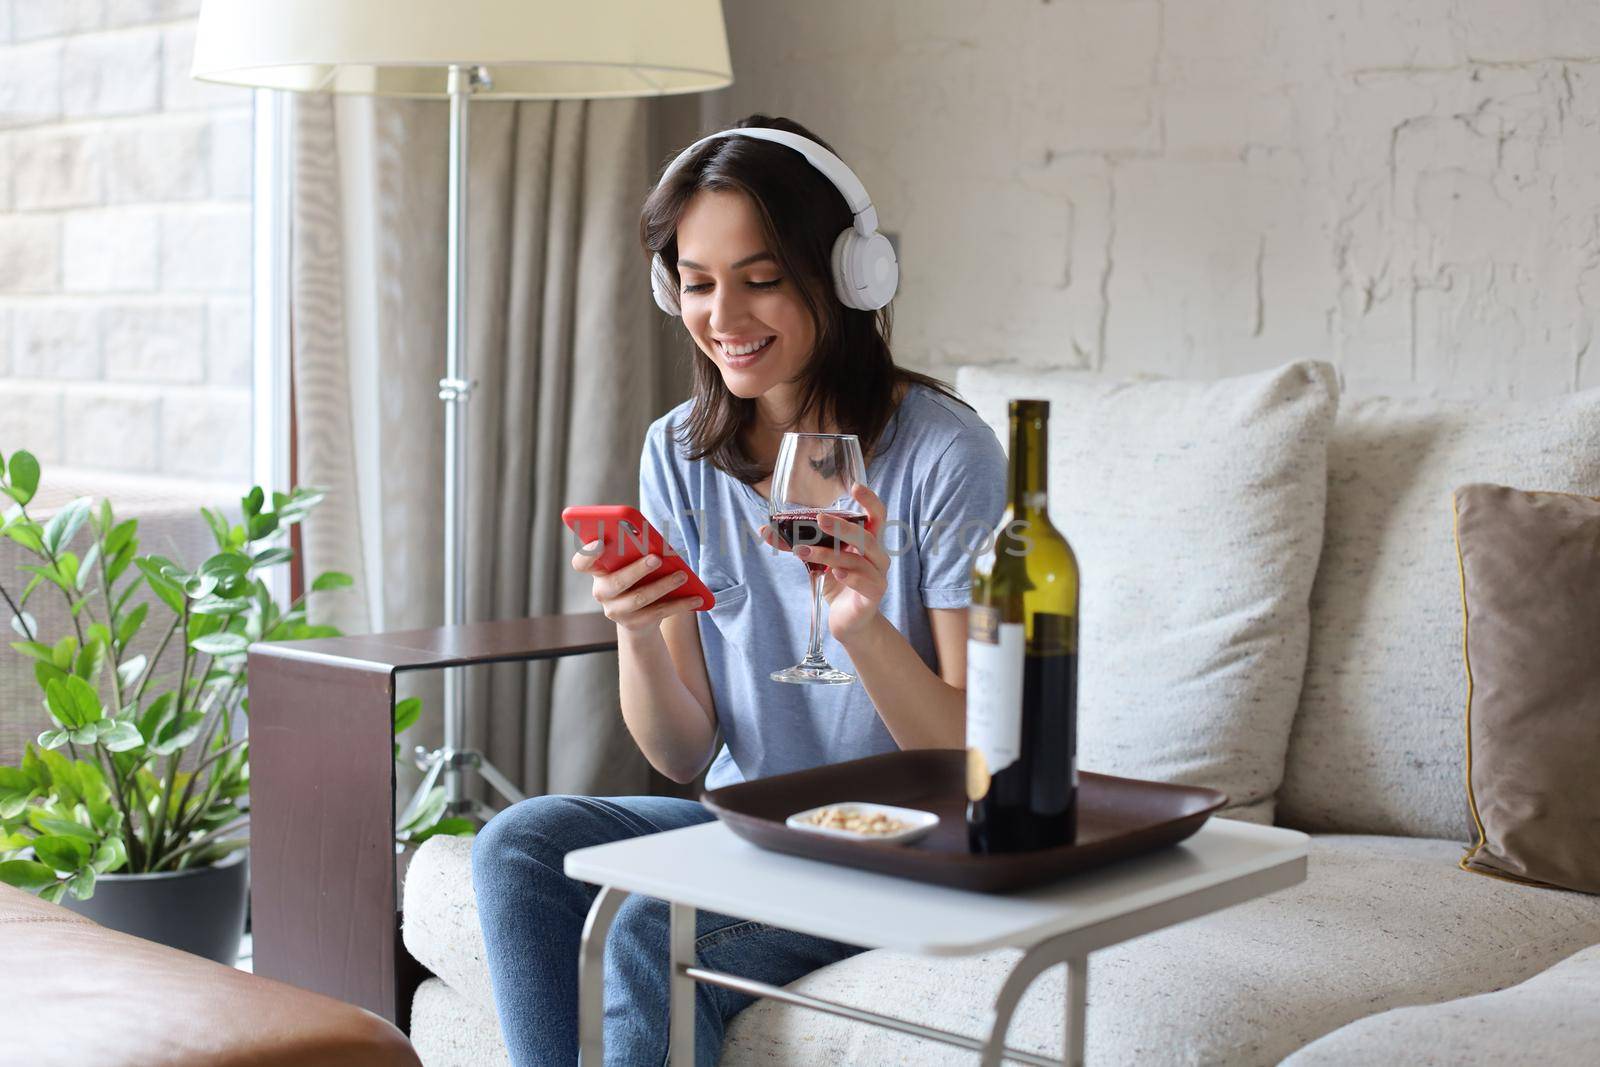 Pretty girl using her smartphone on couch at home in the living room. Listening music, drinking red wine, relaxation after a hard week at work